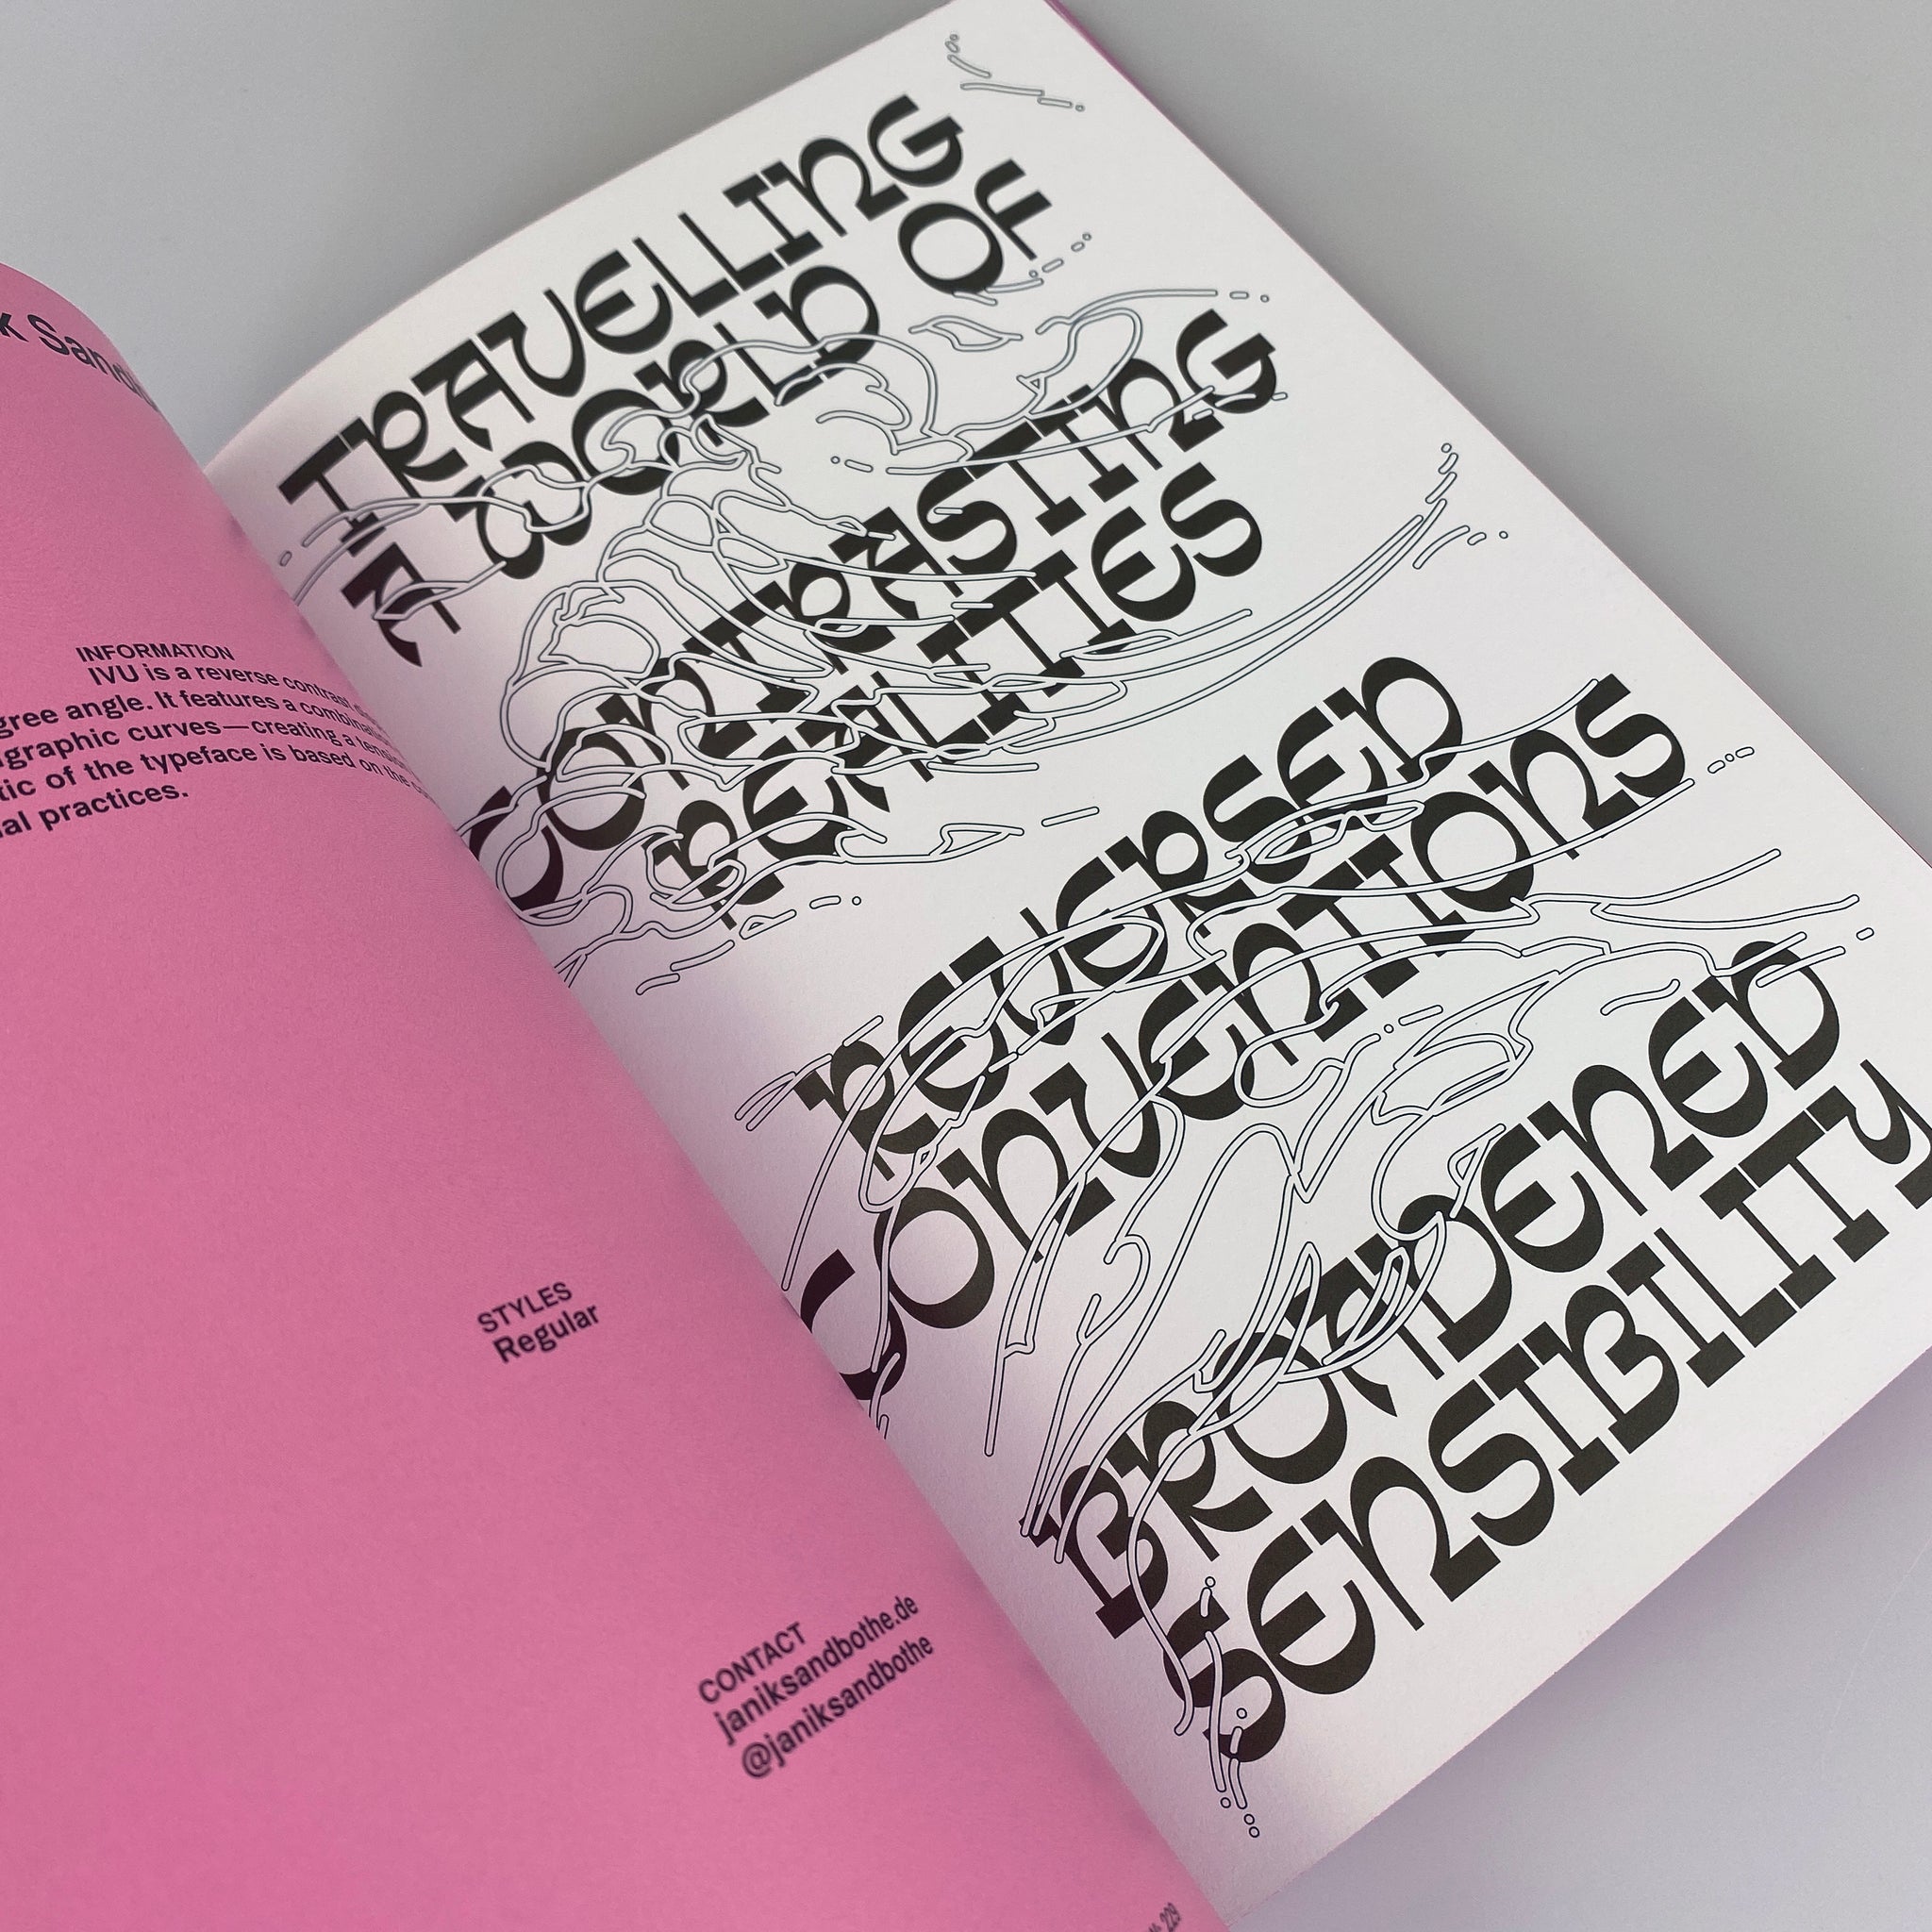 New Aesthetic 3: A Collection of Experimental and Independent Type Design